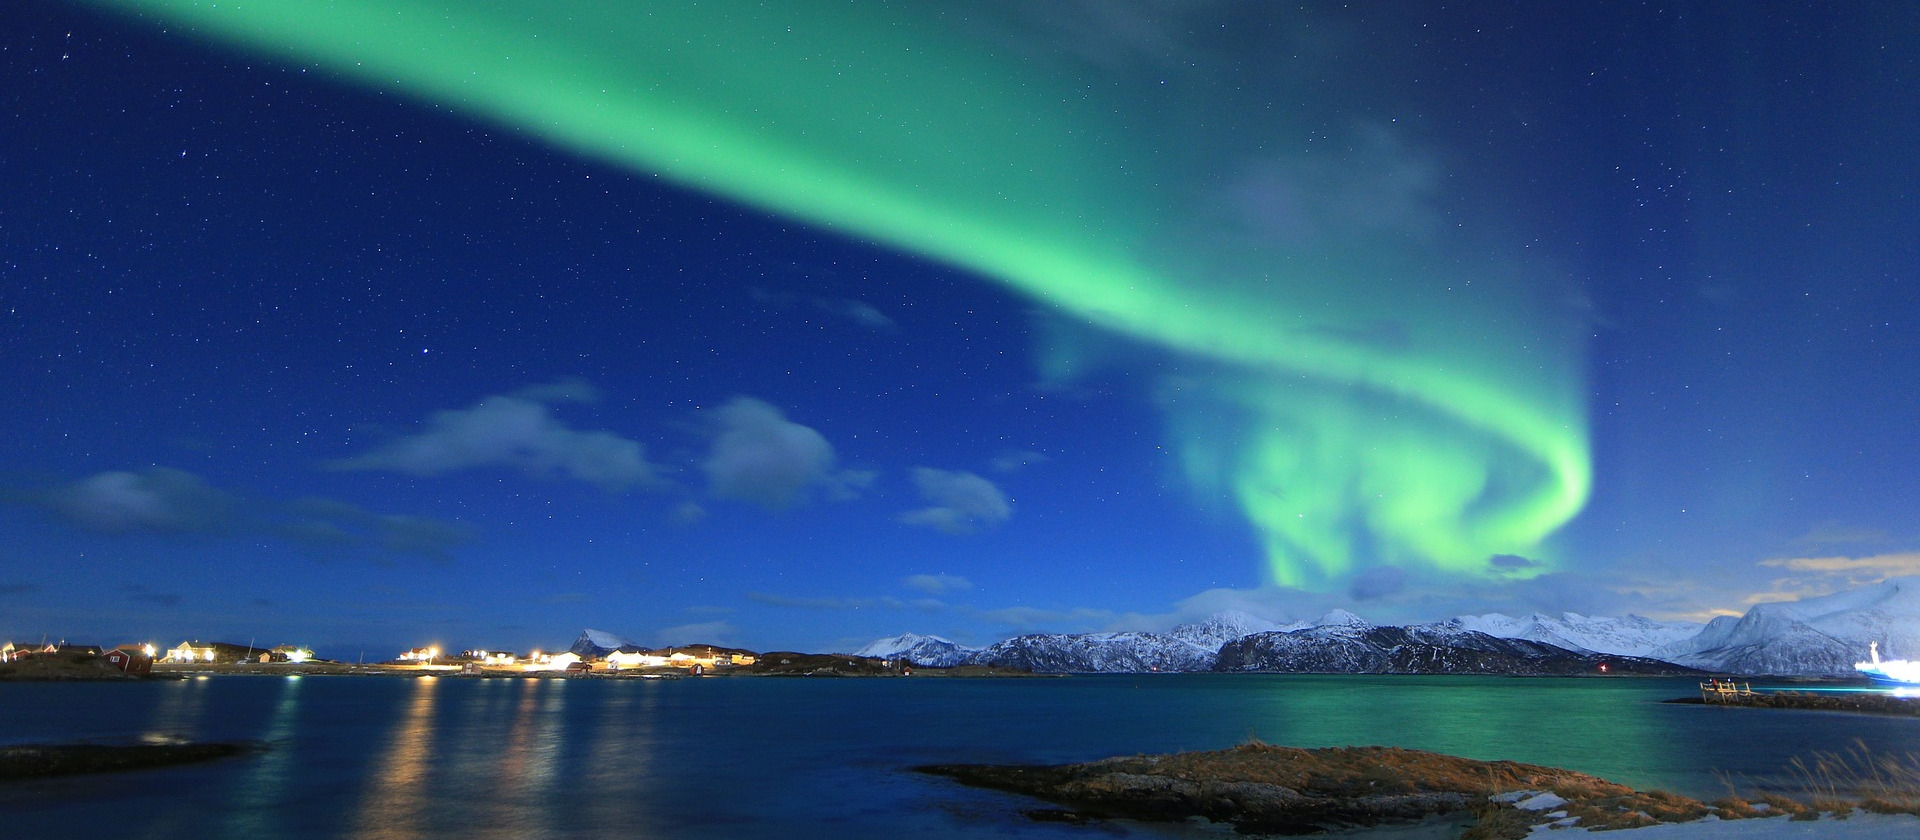 Aurora Borealis over sea and town in Norway